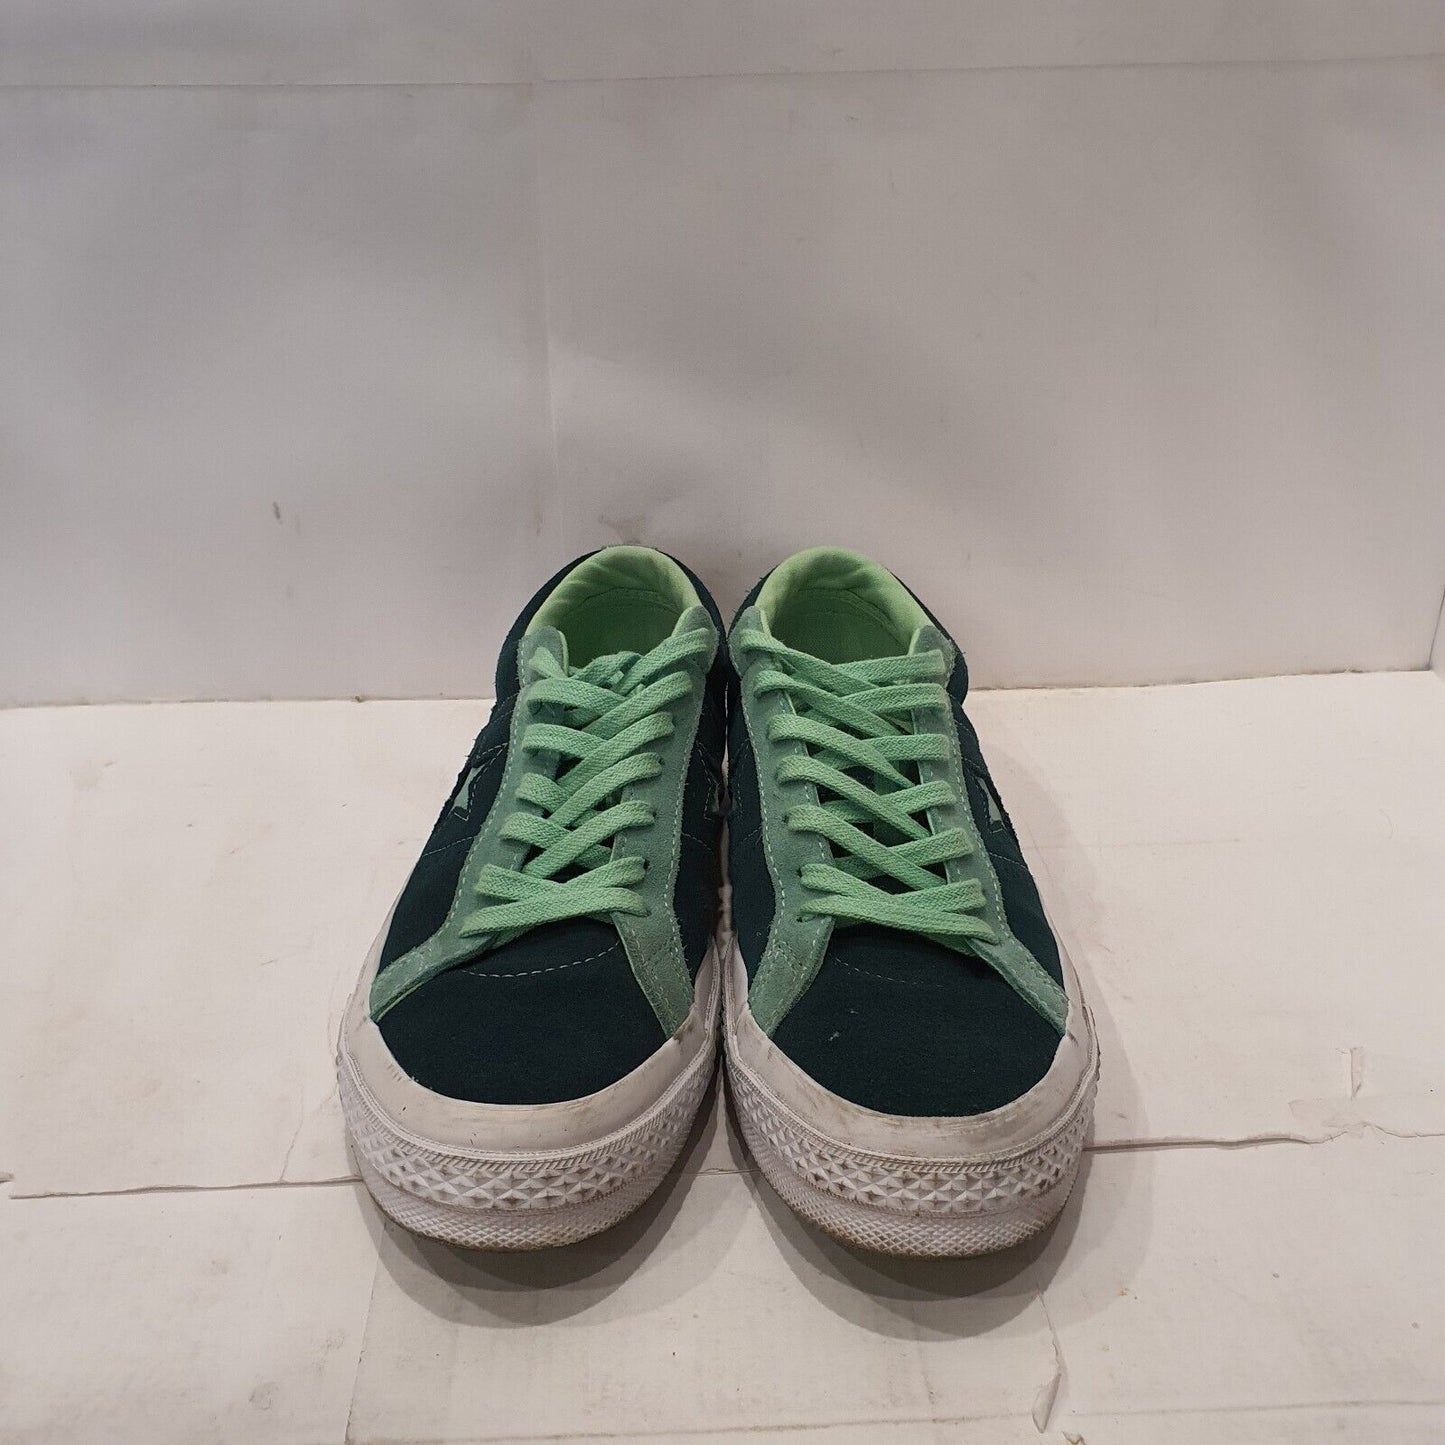 Converse One Star OX Carnival US Men 8